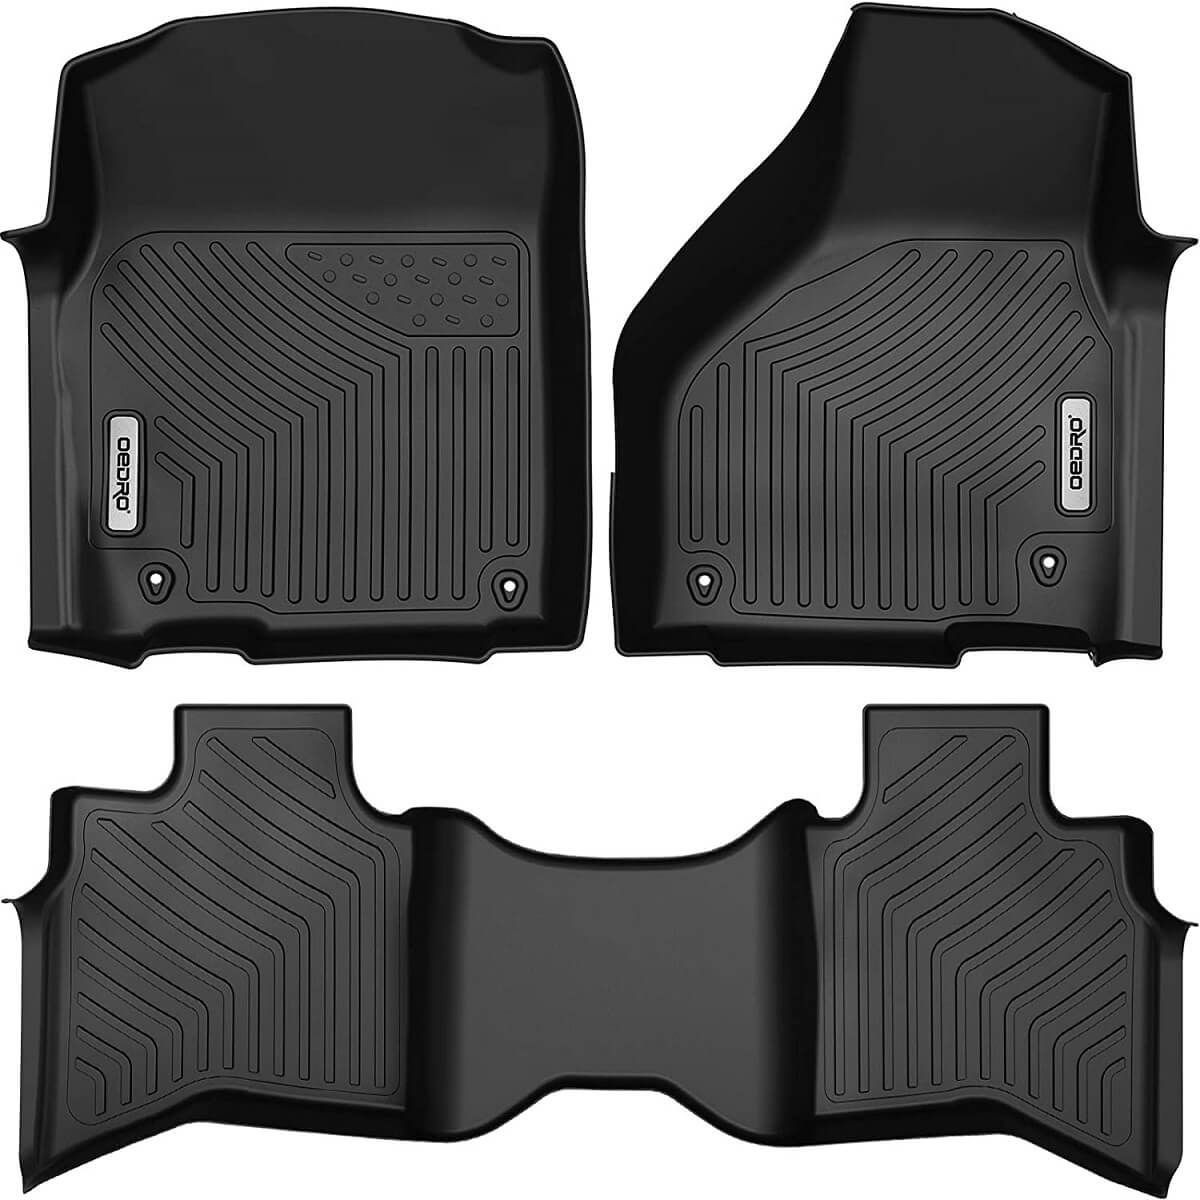 3-Piece All-Weather Floor Mats for 2012-2022 Dodge Ram 1500 Classic Quad Cab (1st & 2nd Row, Black) $48 + Free Shipping